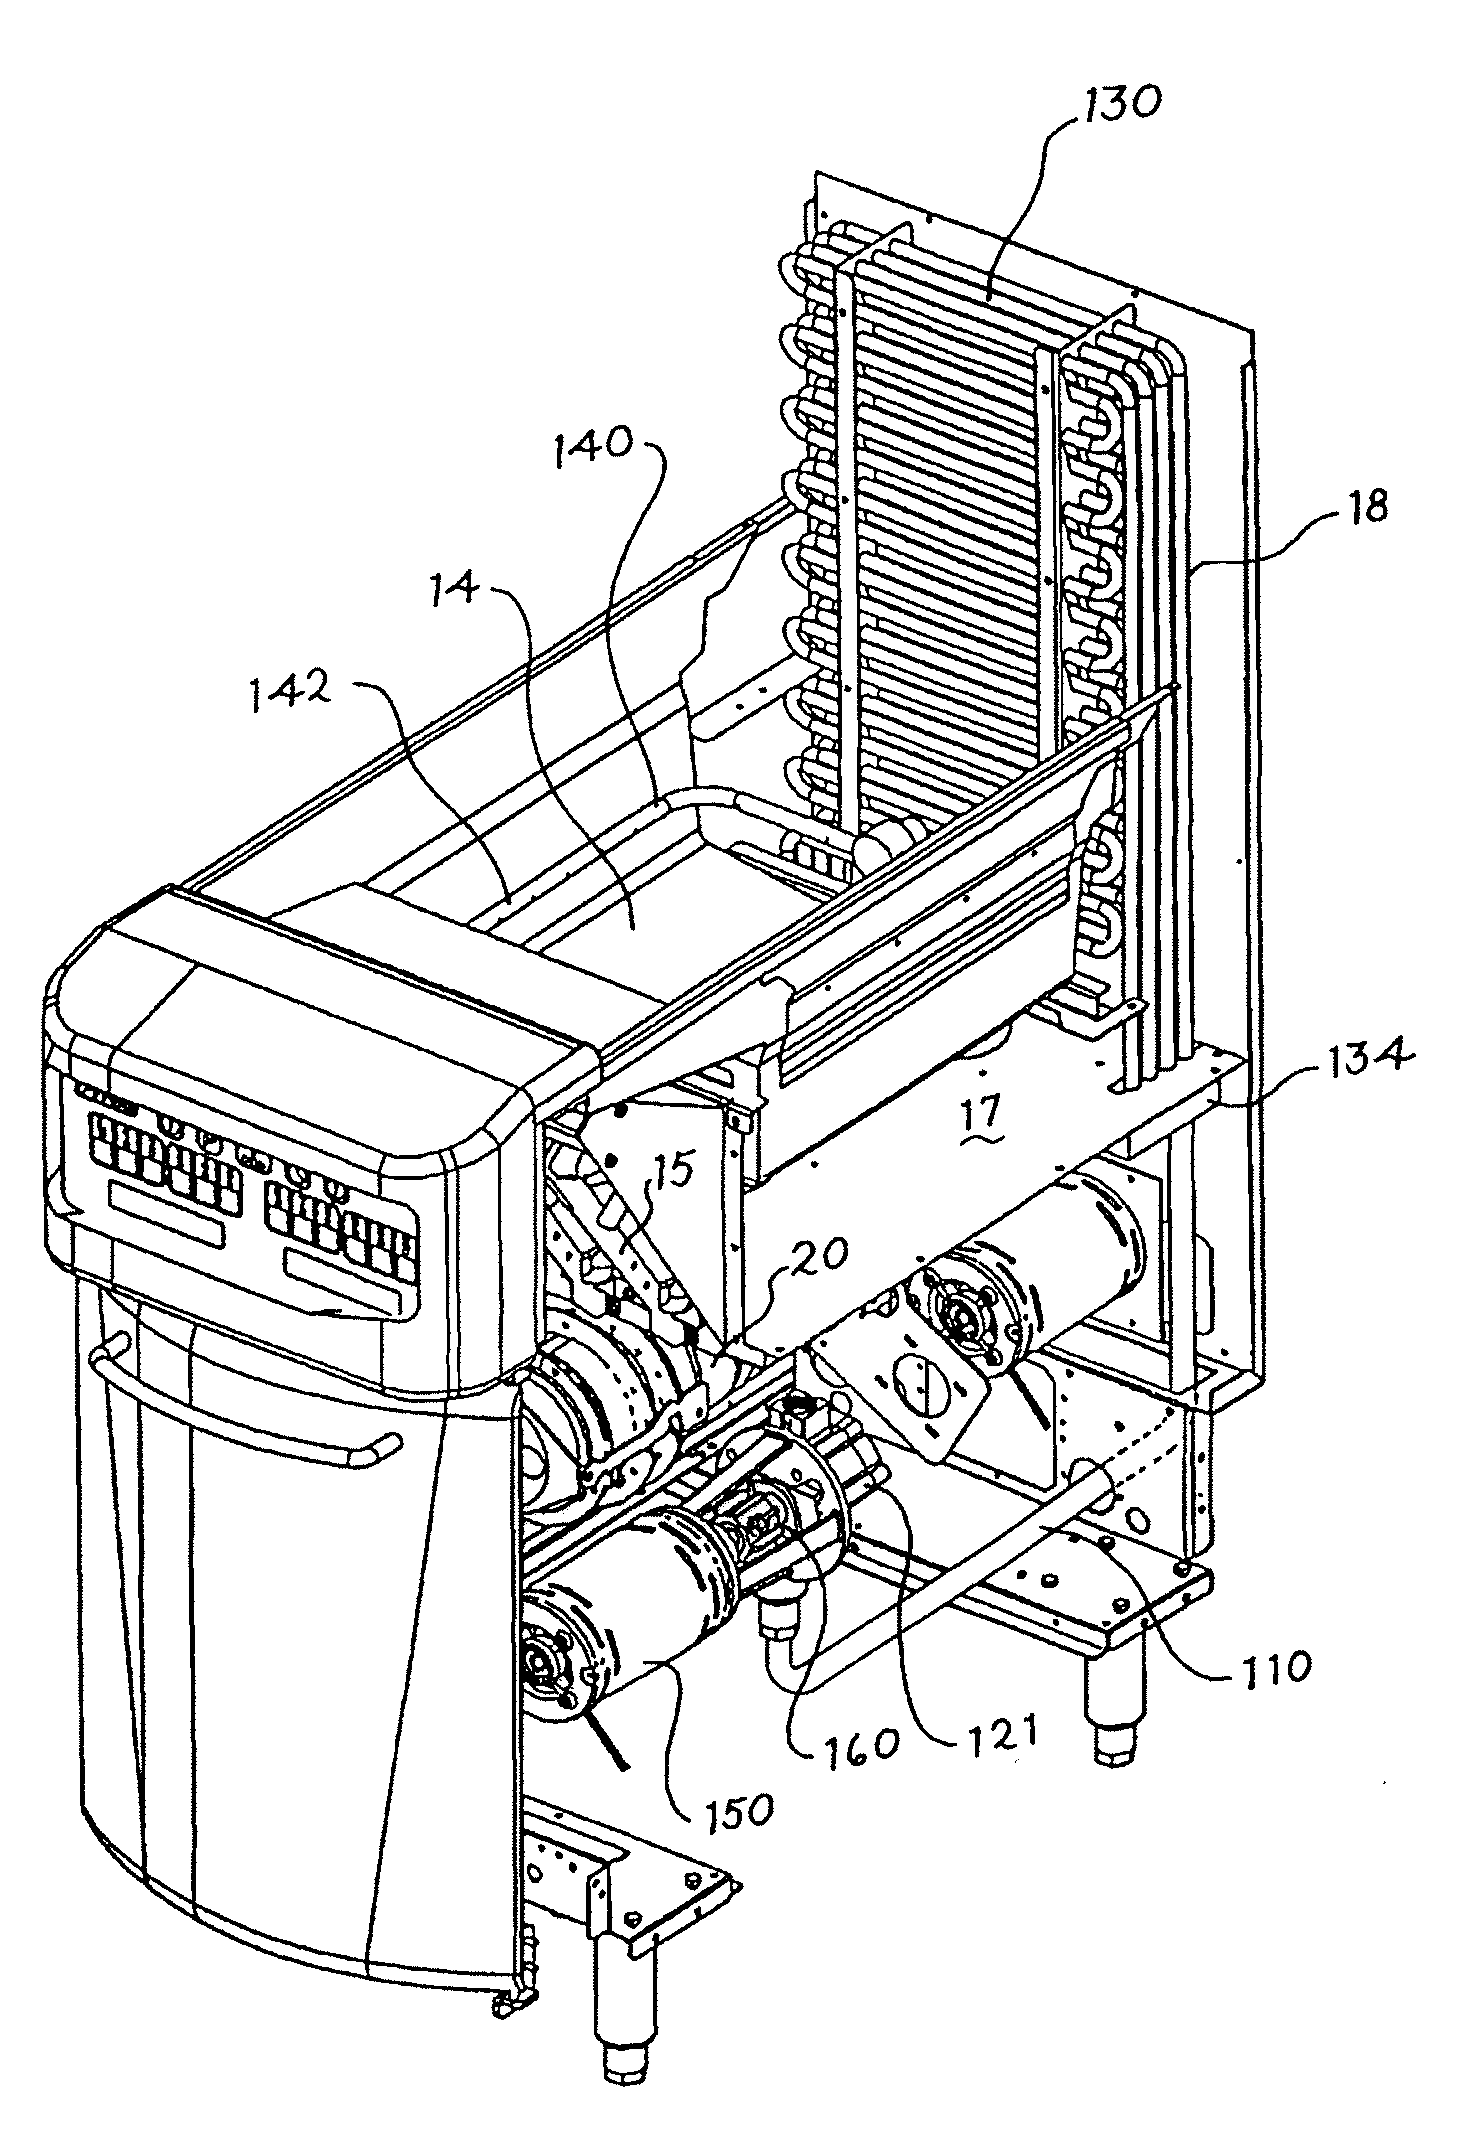 Continuously operating filtering apparatus